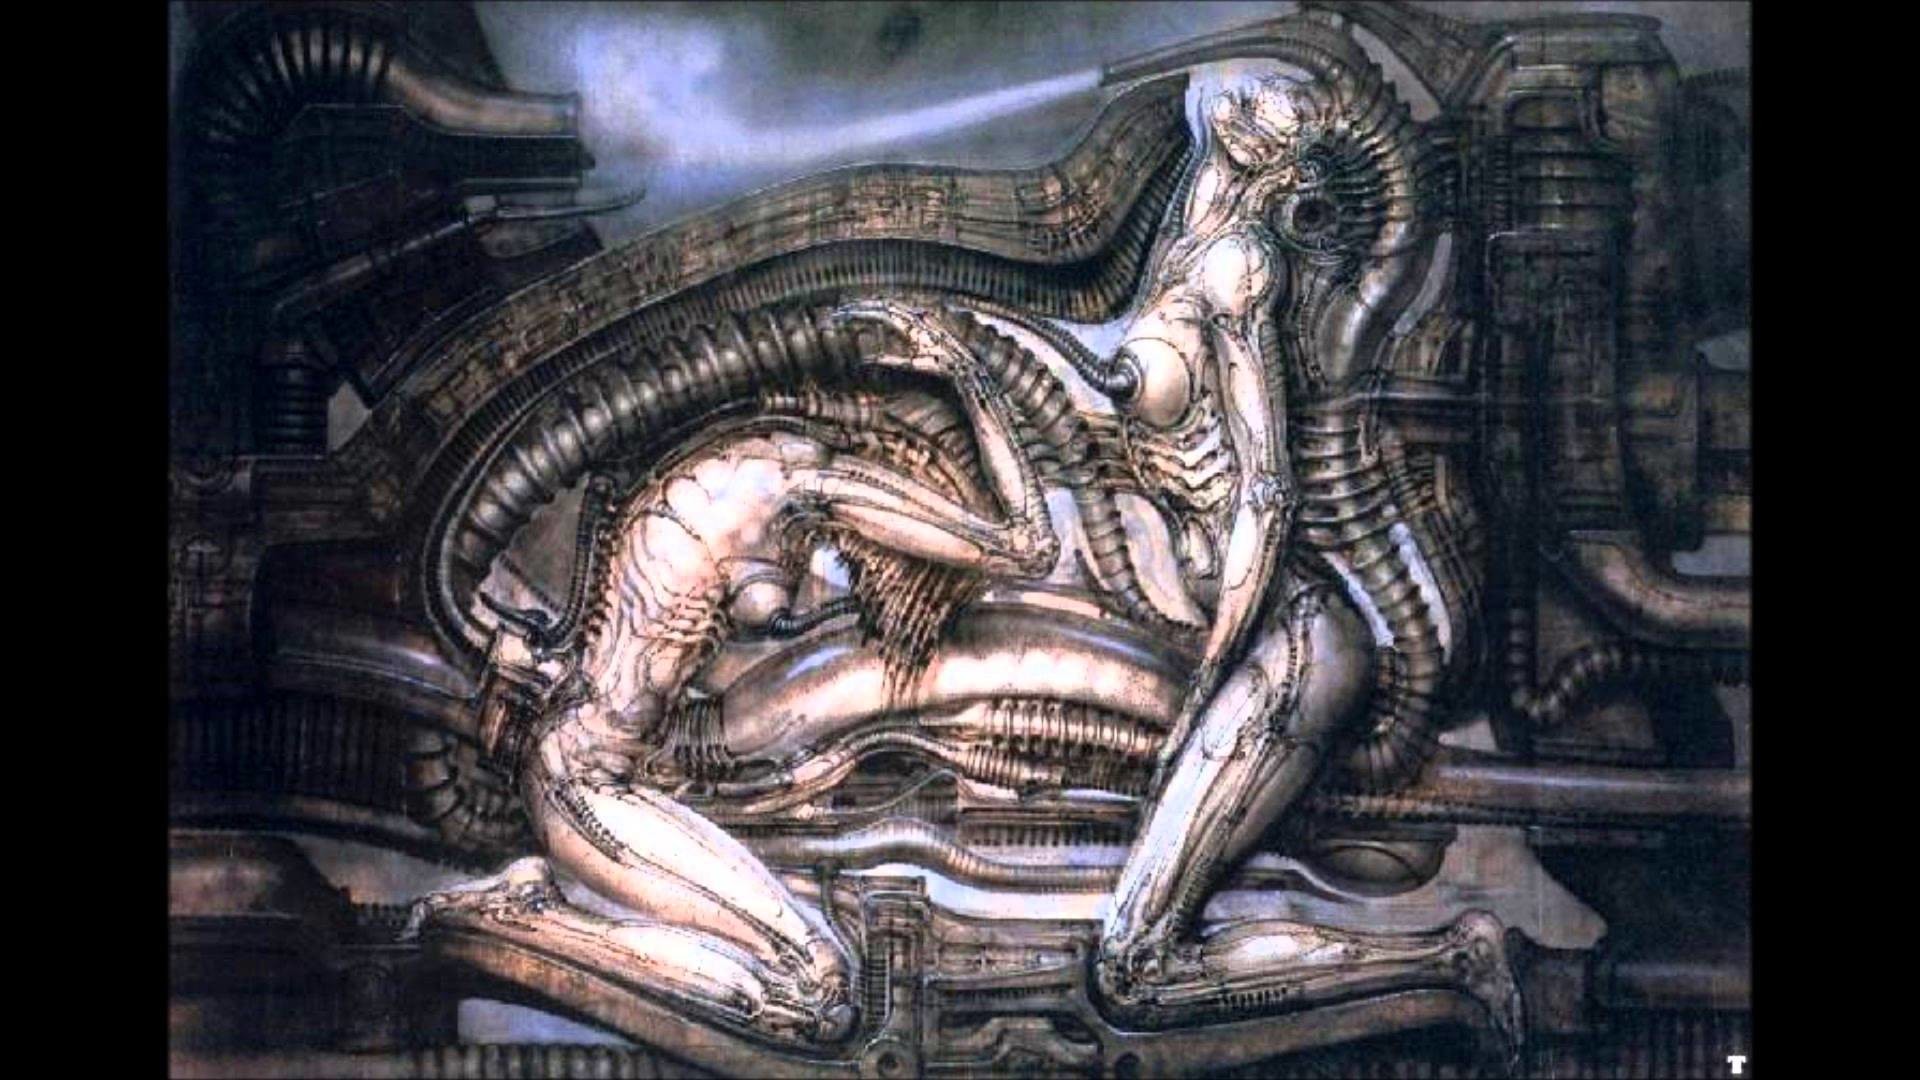 TRIBUTO A HR GIGER